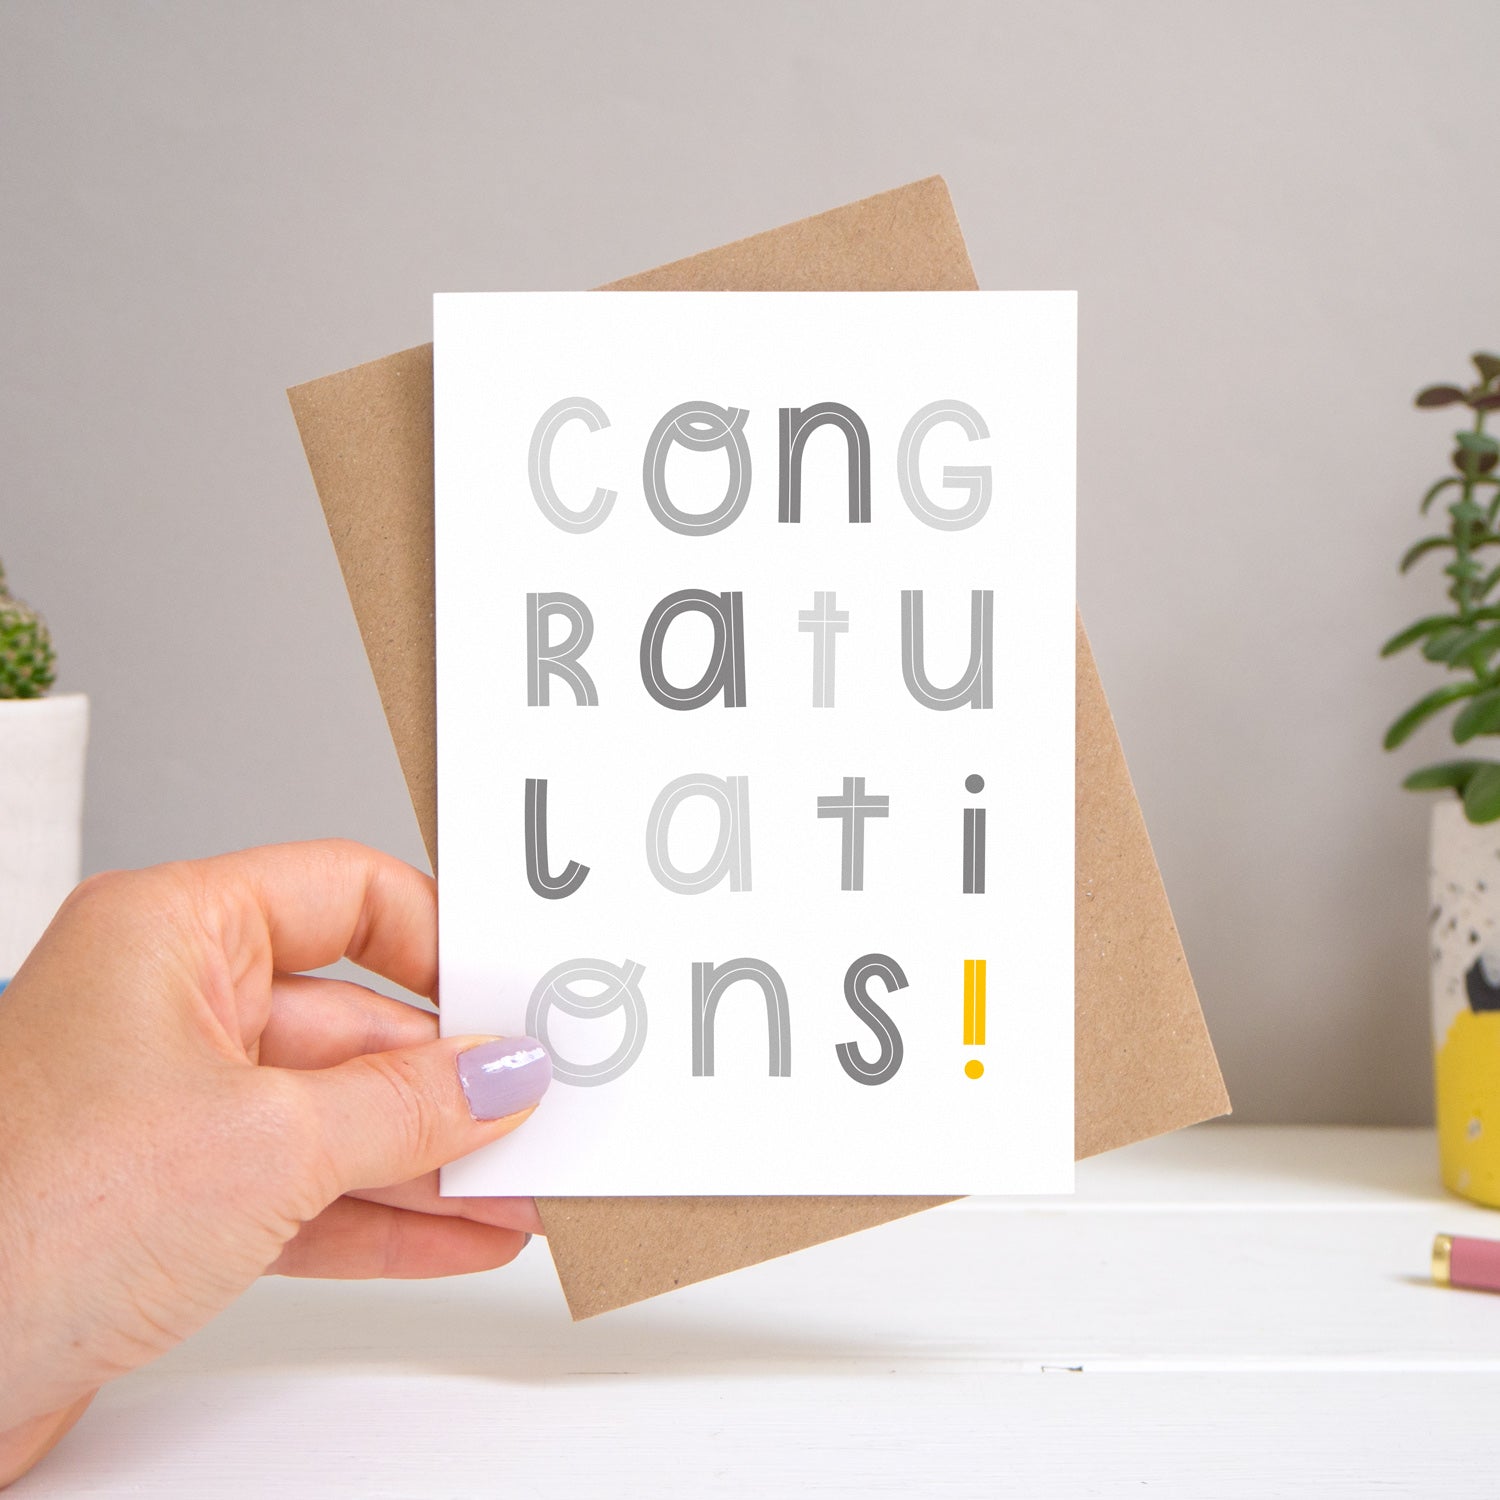 A congratulations card held over a warm grey and white background with potted plants peeping the sides. Behind the card is a kraft brown envelope that comes with the card. The text on this version of the card is in varying tones of grey.